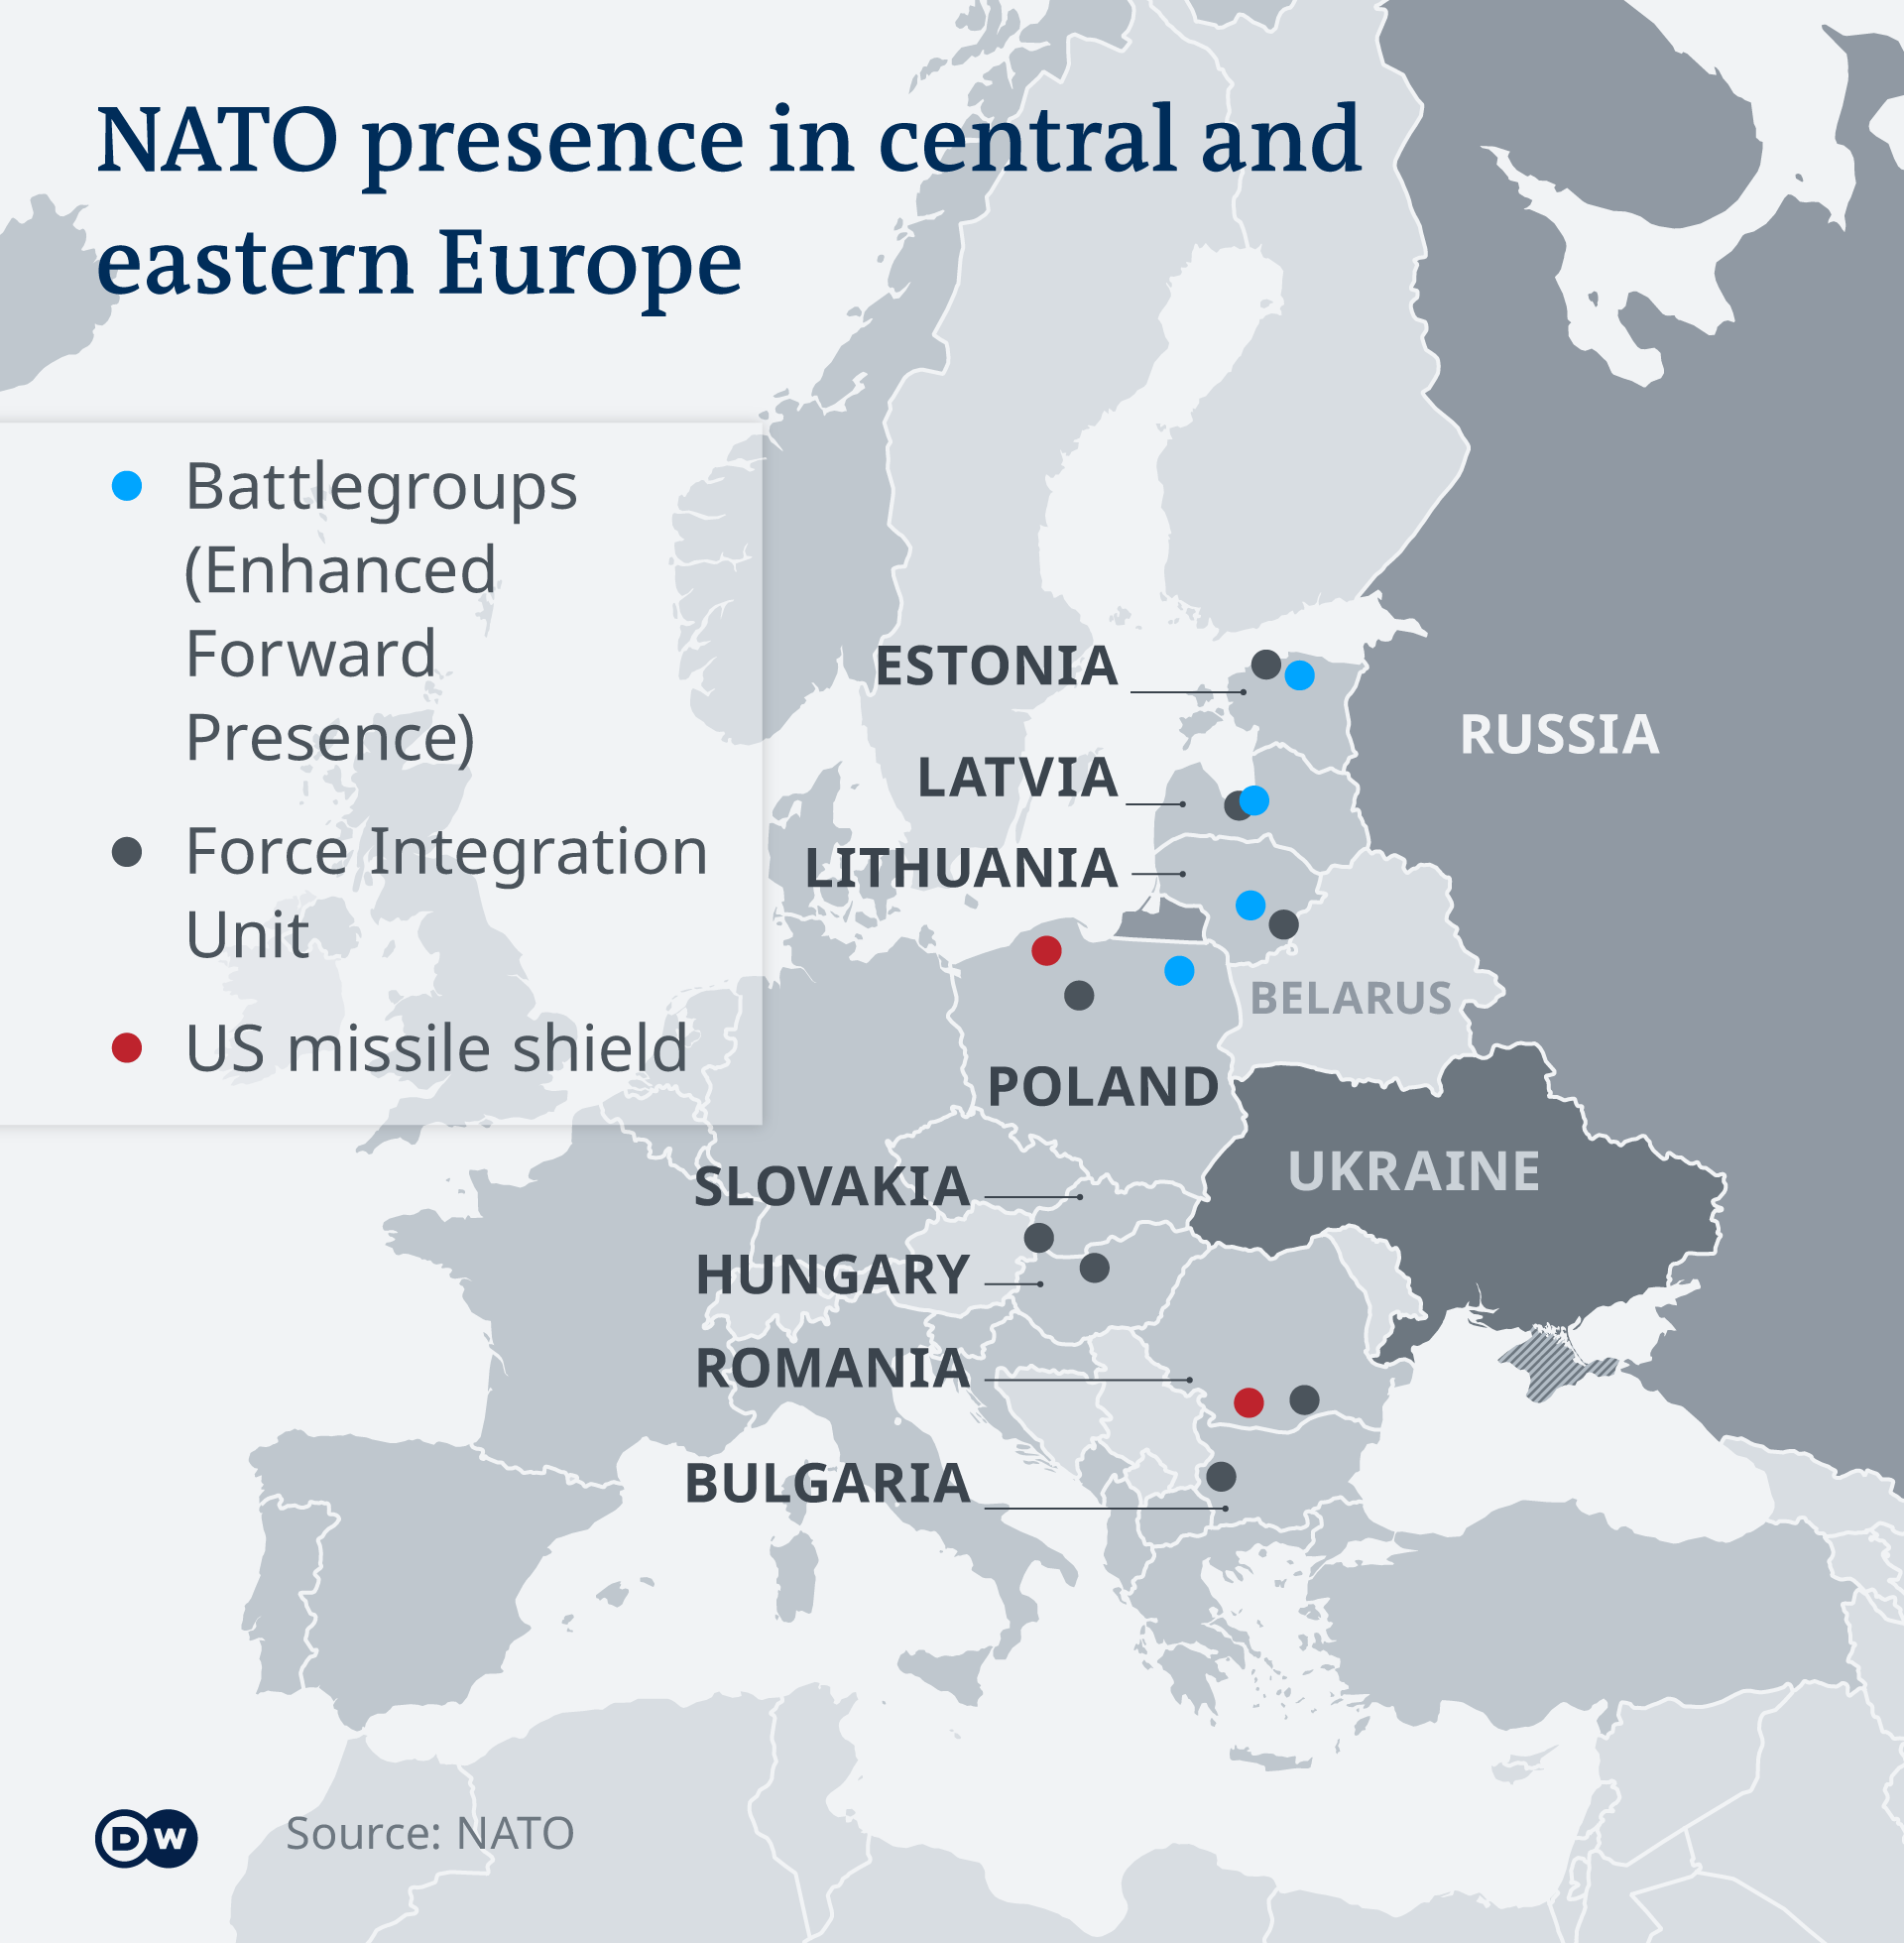 A map illustrating NATO's presence in Eastern Europe